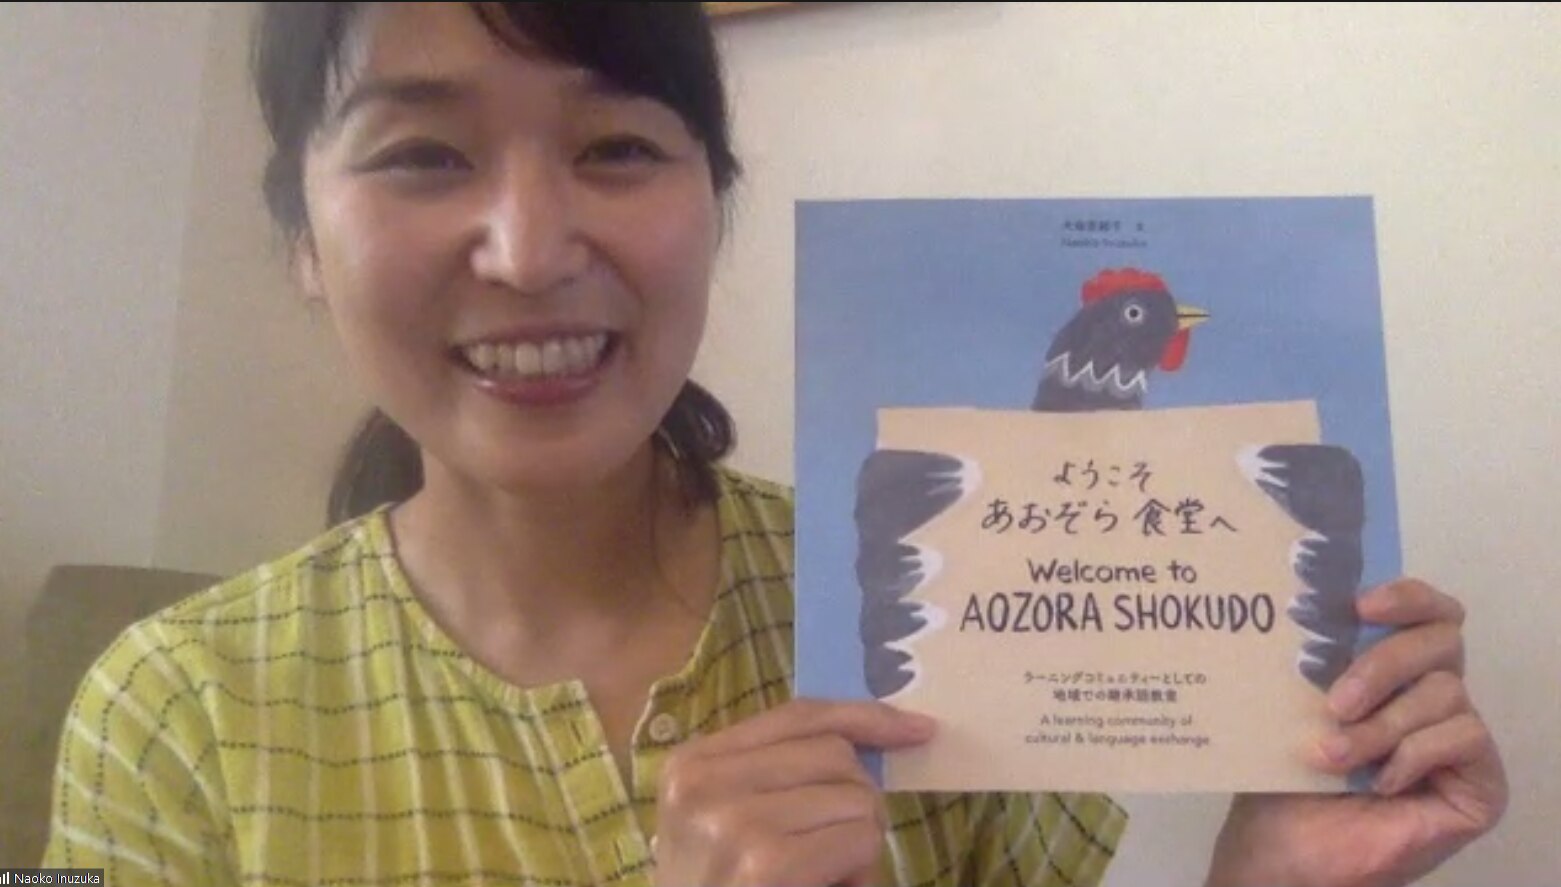 A Sydney-based Japanese mum and director of a Japanese learning community in Melbourne Naoko Inuzuka published a book to expand the community activities.